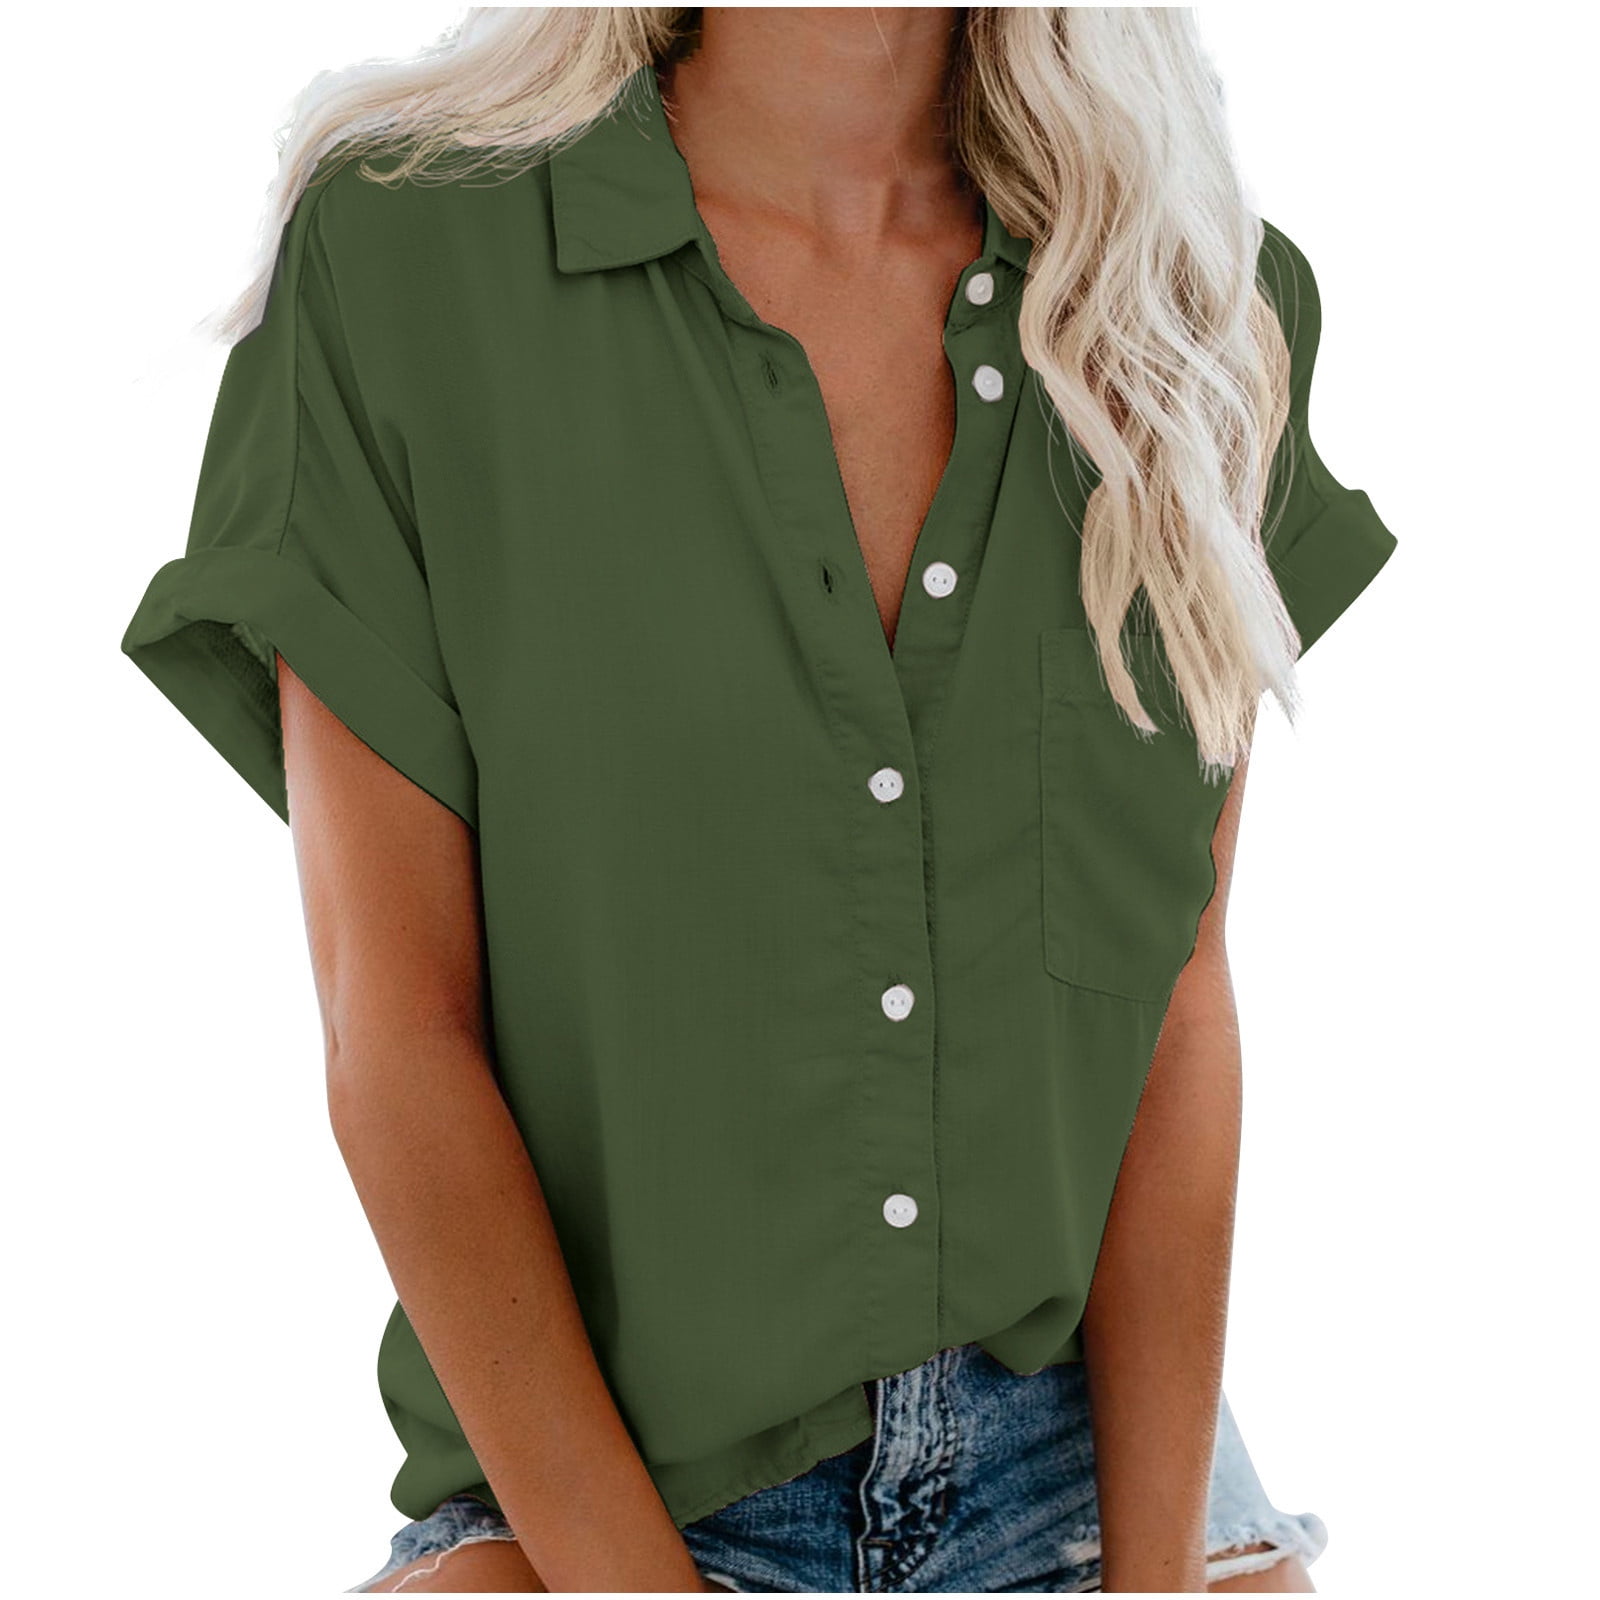 QENGING Womens Tops Plus Size Trendy Button Down Tees Causal Button Solid  Blouse Short Sleeve T-Shirt Olive Green L Summer Clearance